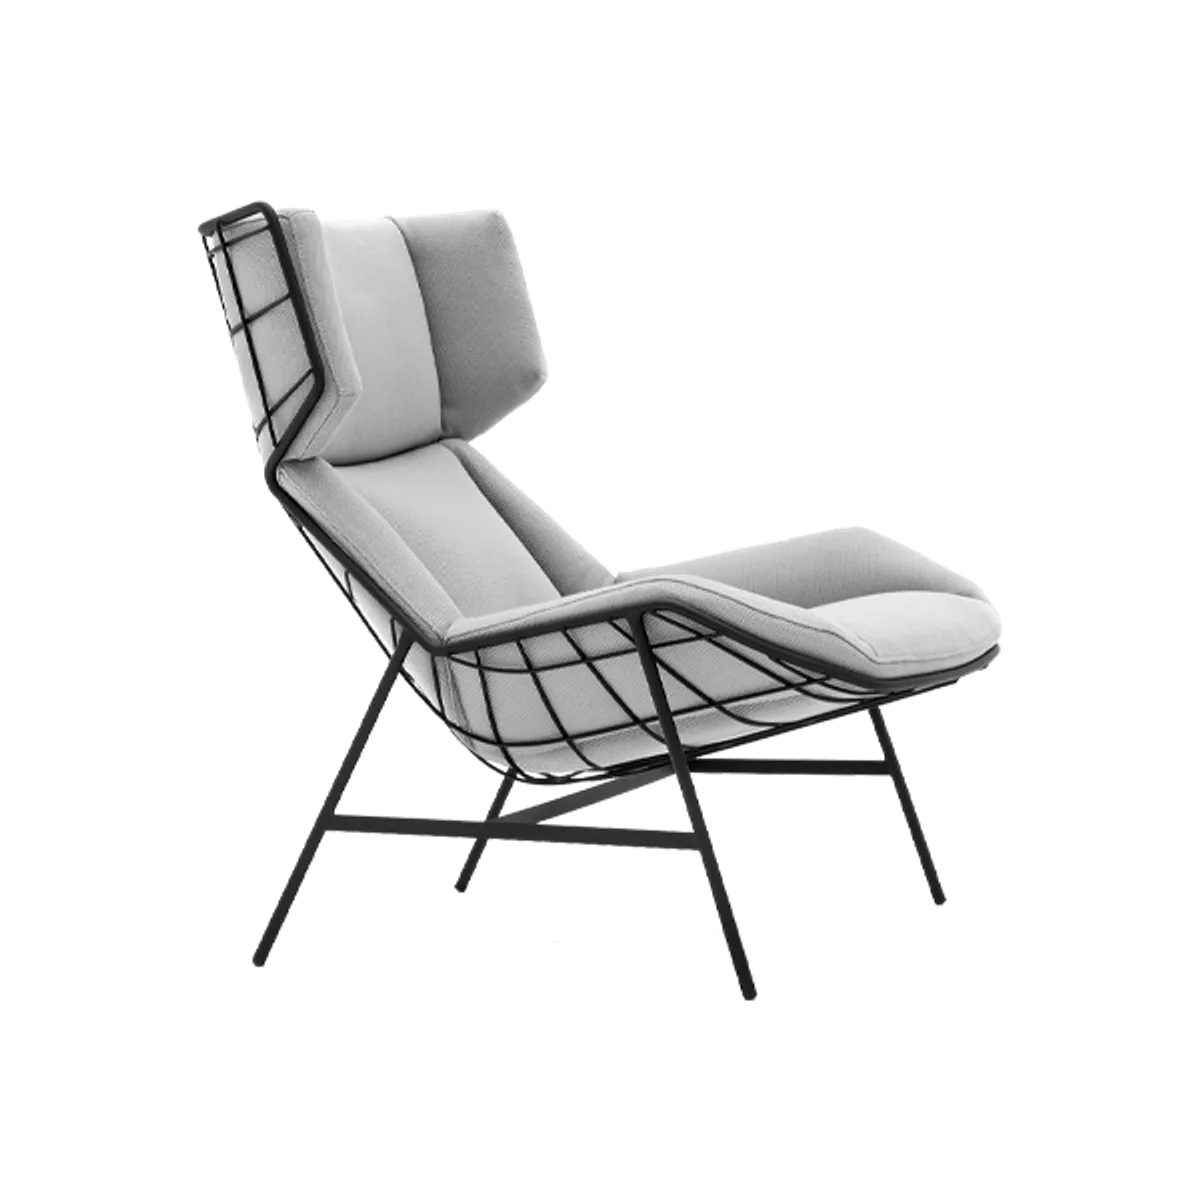 Summer High Back Lounge Chair Exterior Hotel Furniture Inside Out Contracts